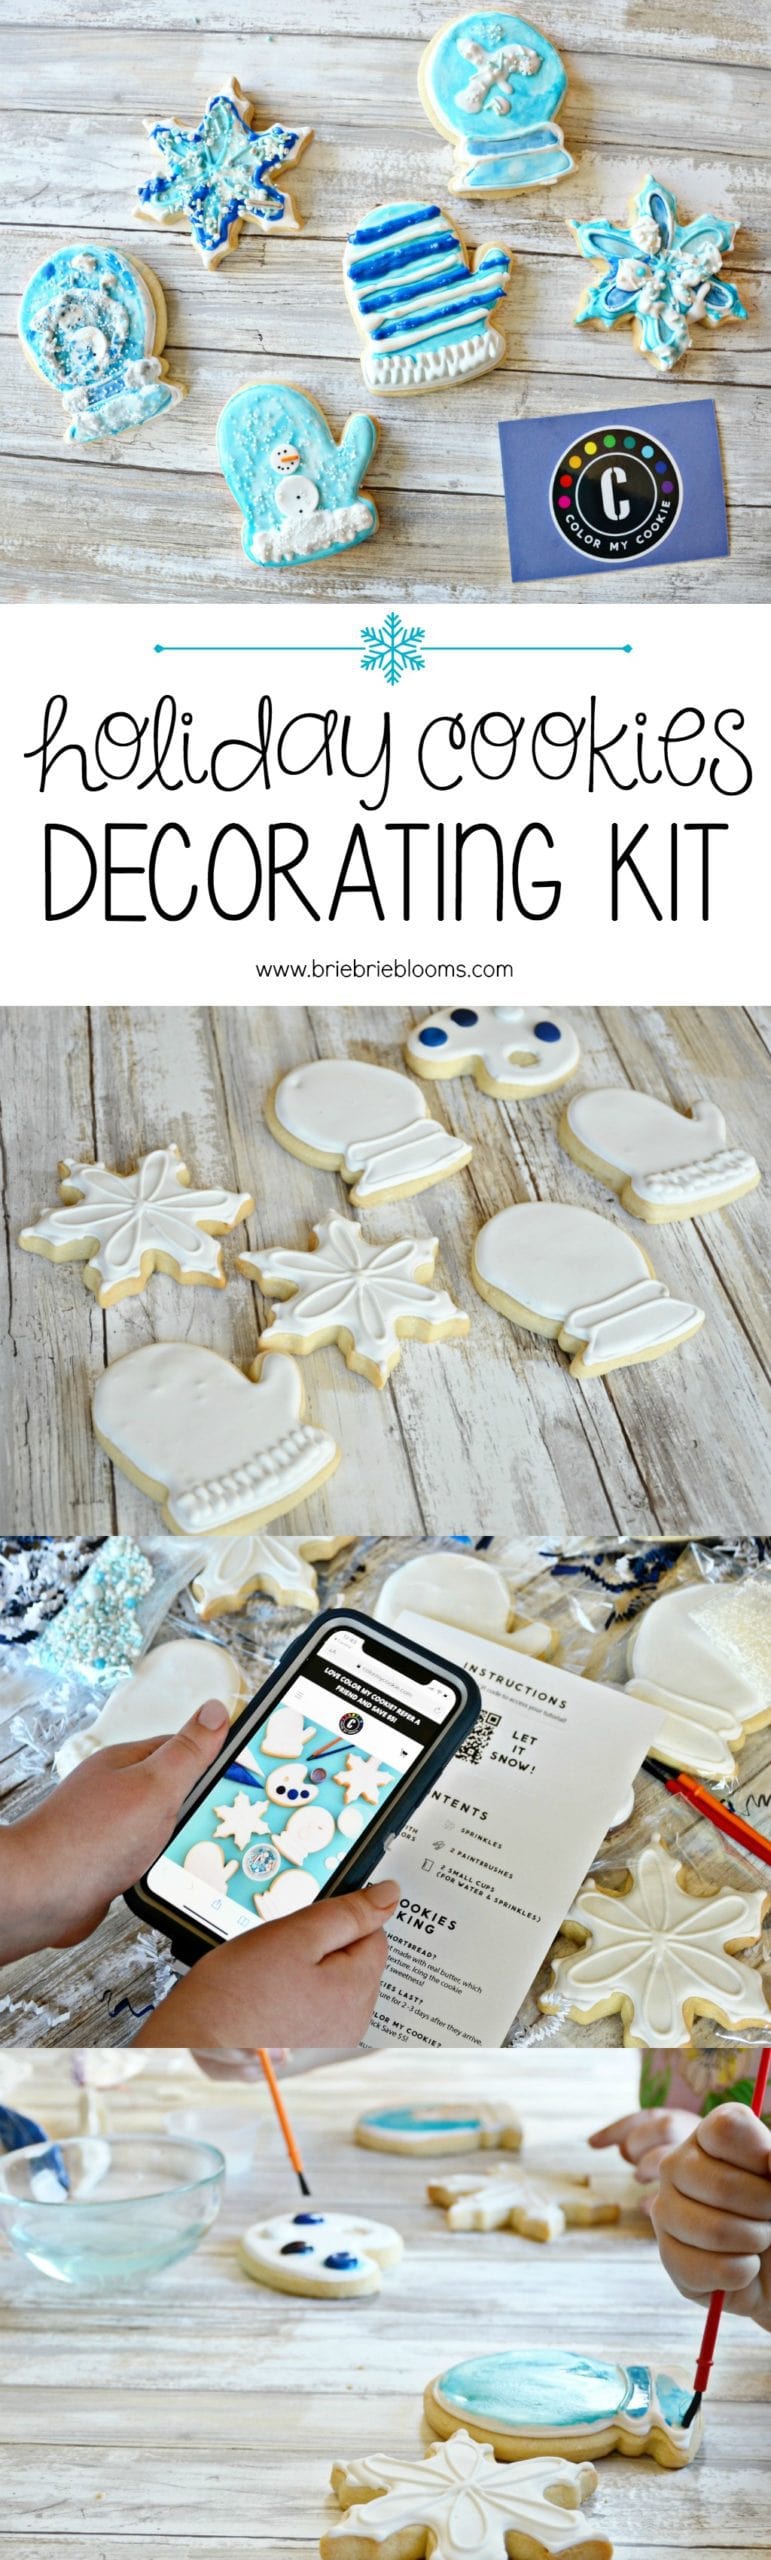 With more time at home together, fill up your winter break with activities like decorating cookies with a Color My Cookie holiday cookies decorating kit.